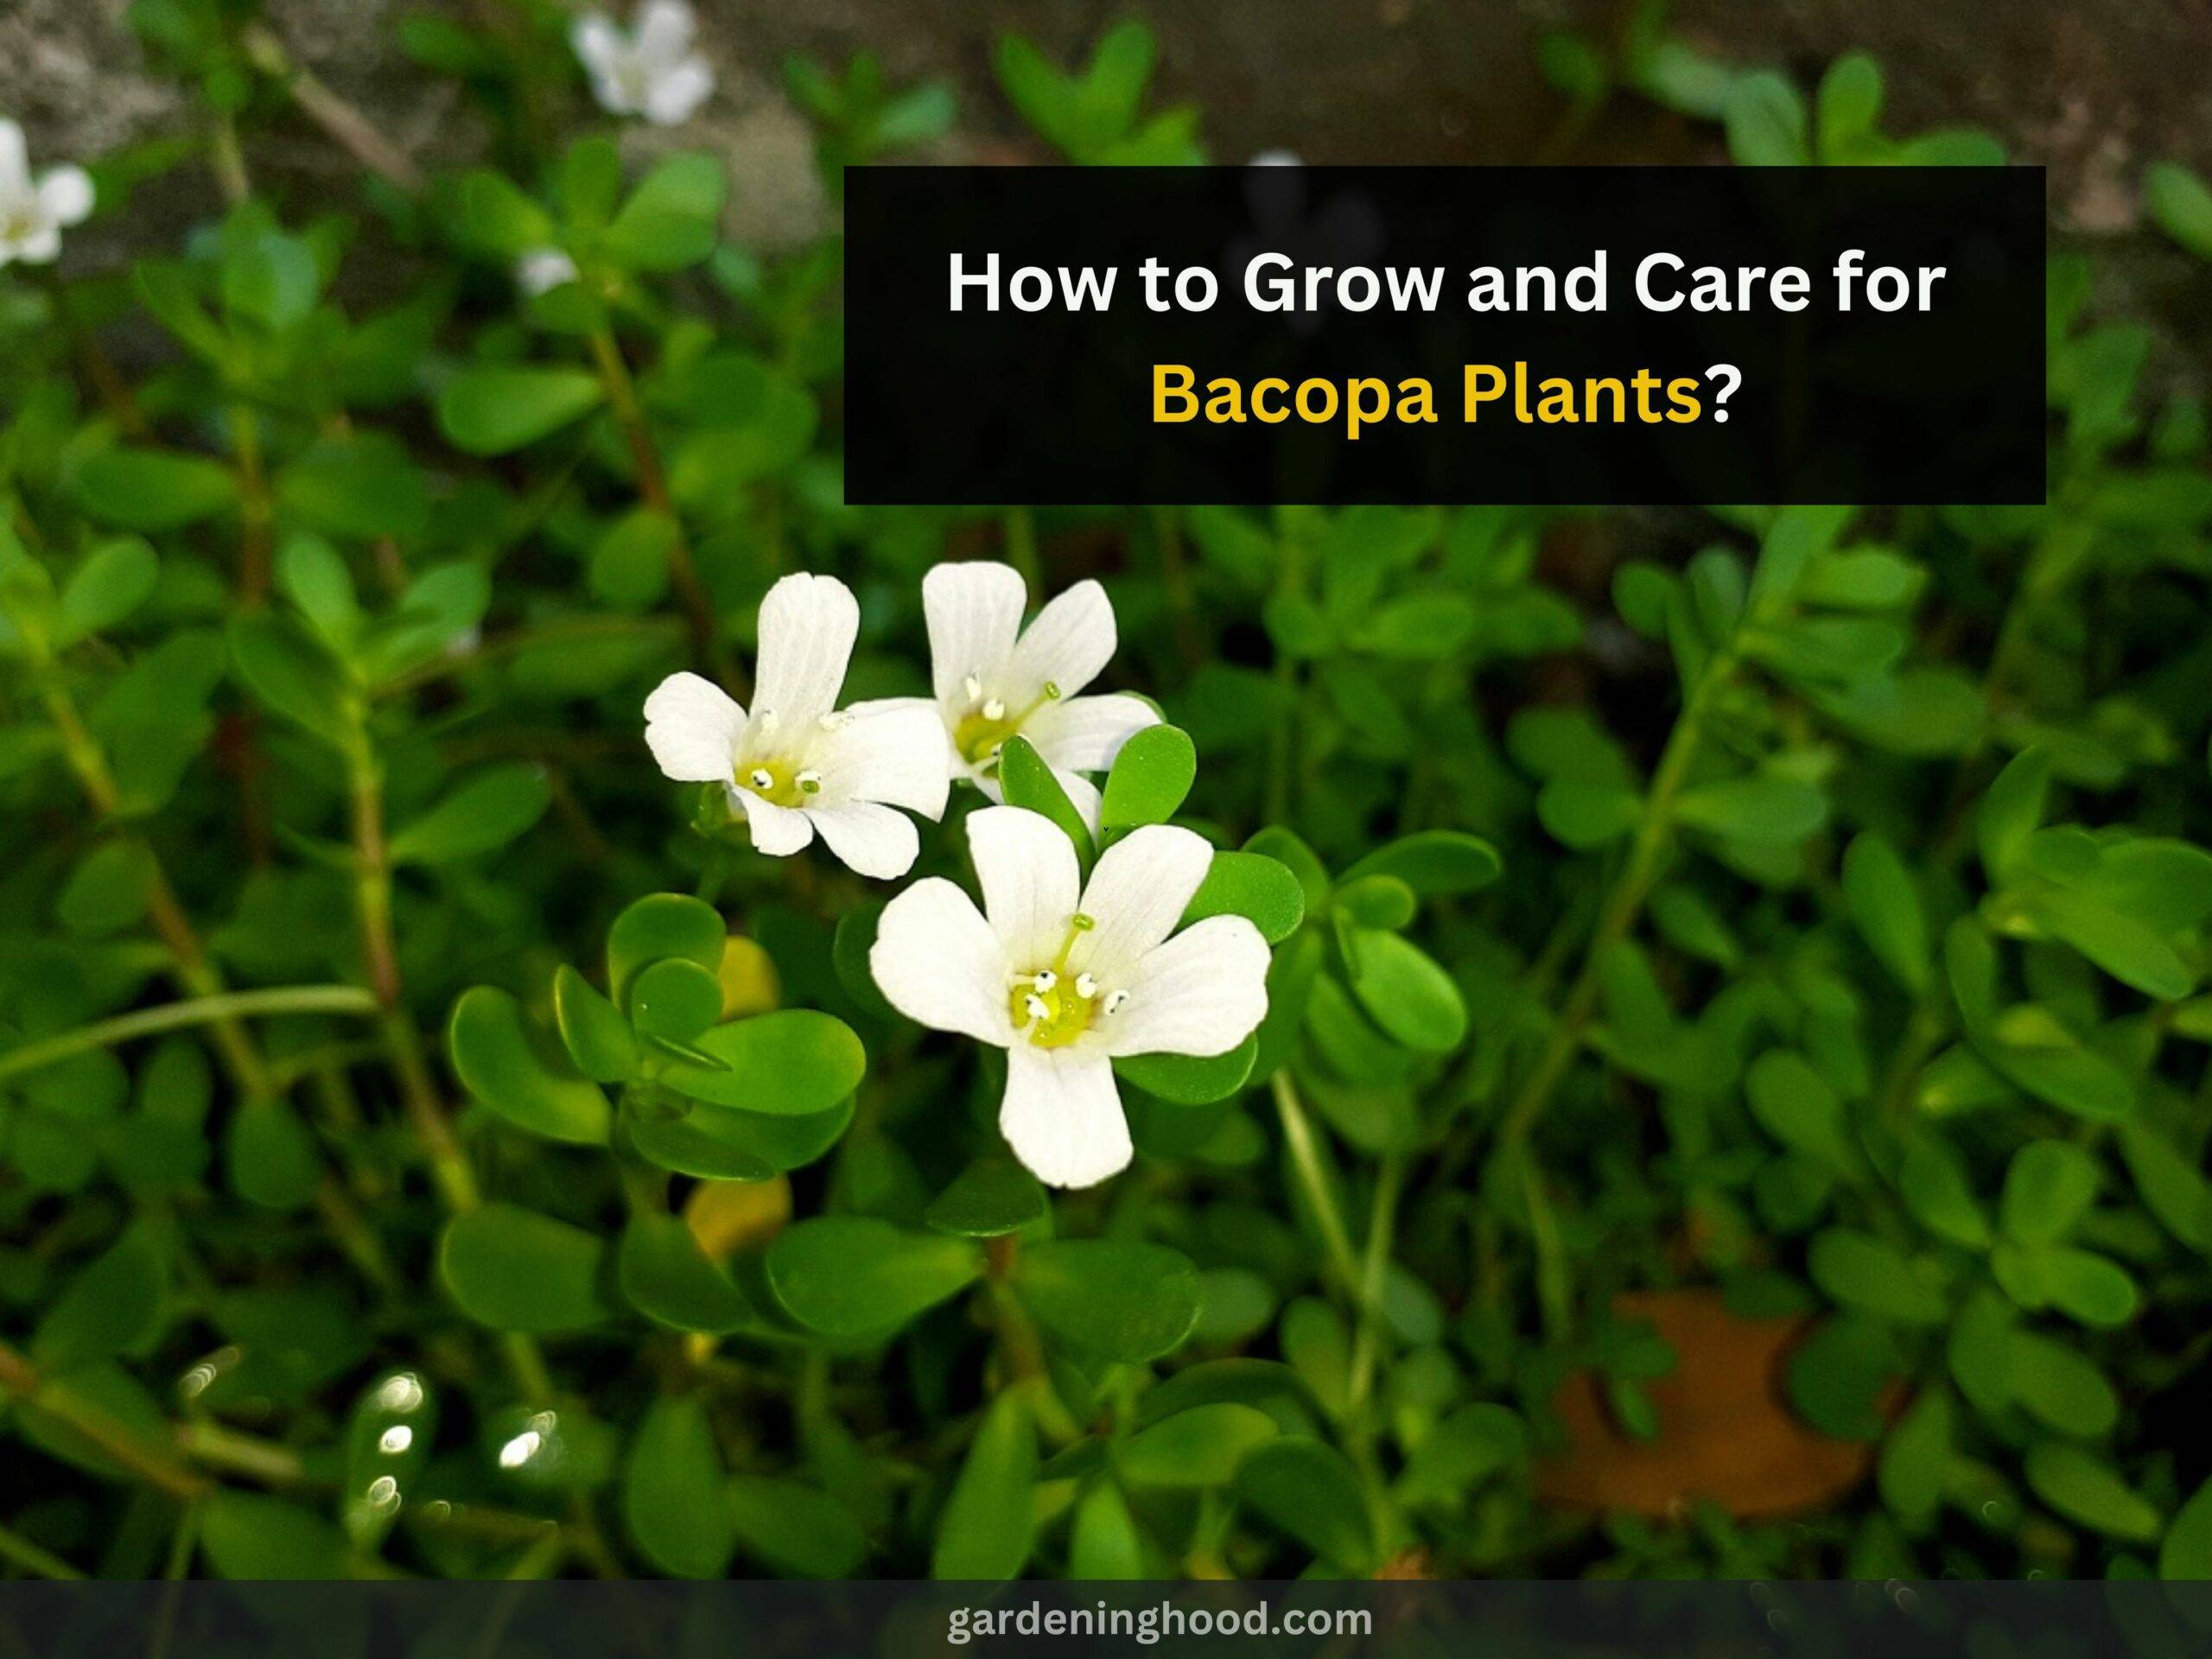 How to Grow and Care for Bacopa Plants?